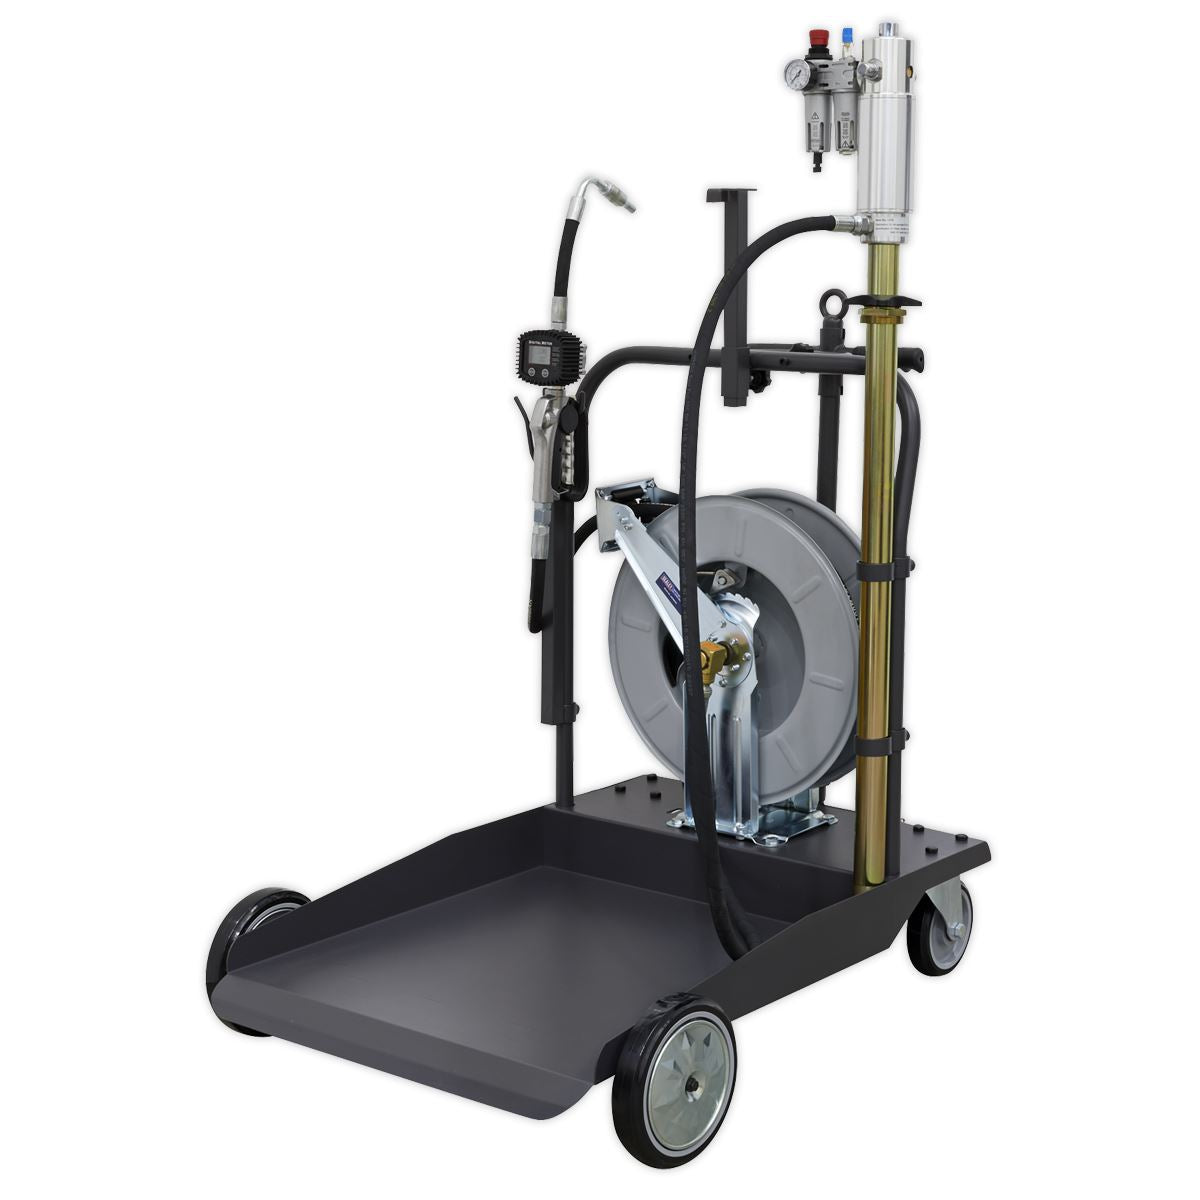 Sealey Oil Dispensing System Air Operated with 10m Retractable Hose Reel